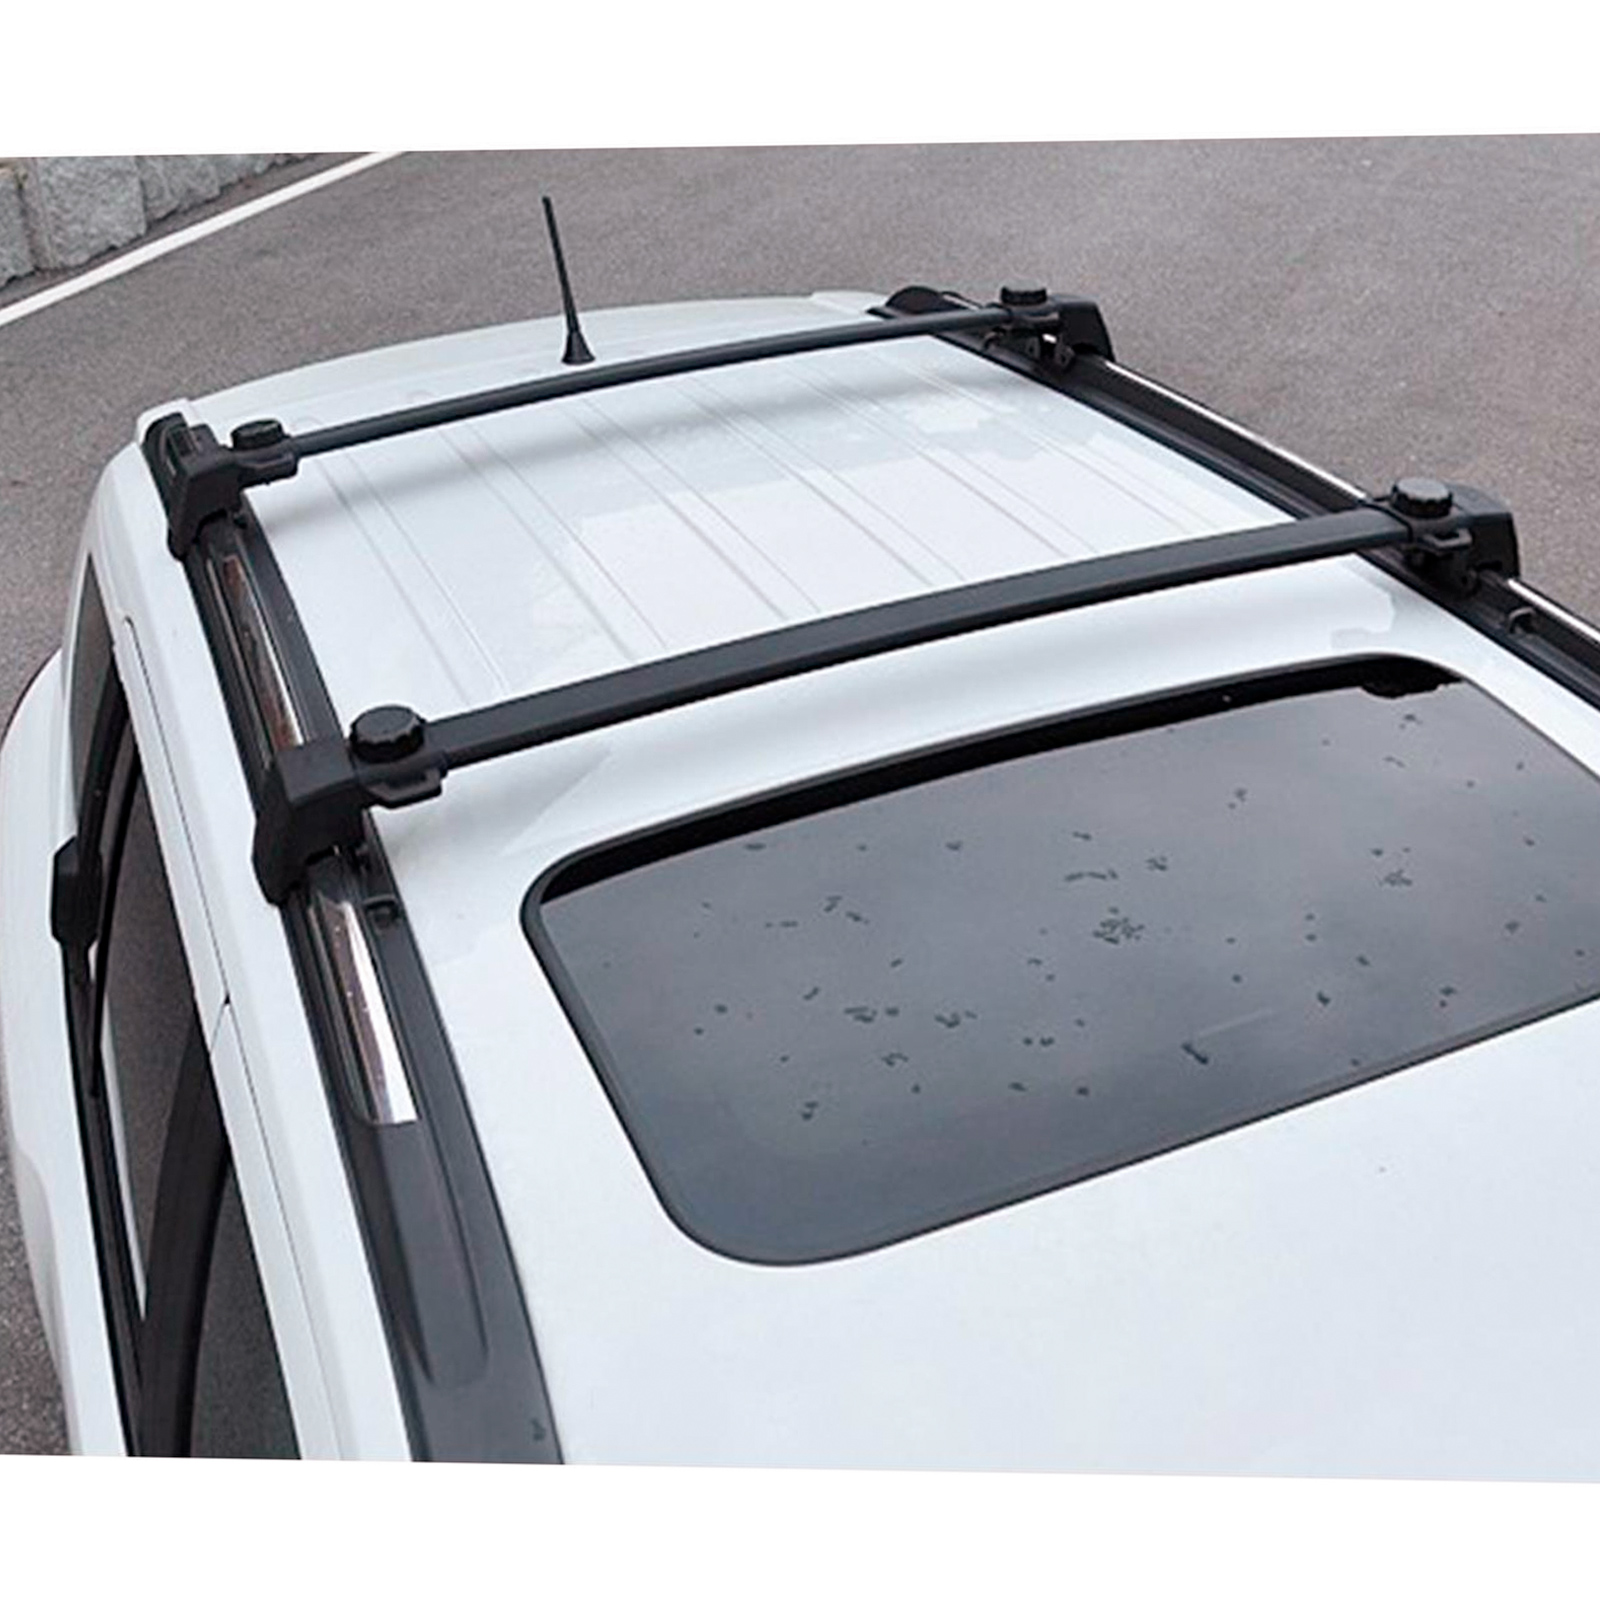 Roof Rack For Jeep Compass Cross Bar 2017- 2019 Durable Roof Rails Storage | eBay 2017 Jeep Compass Roof Rack Cross Bars